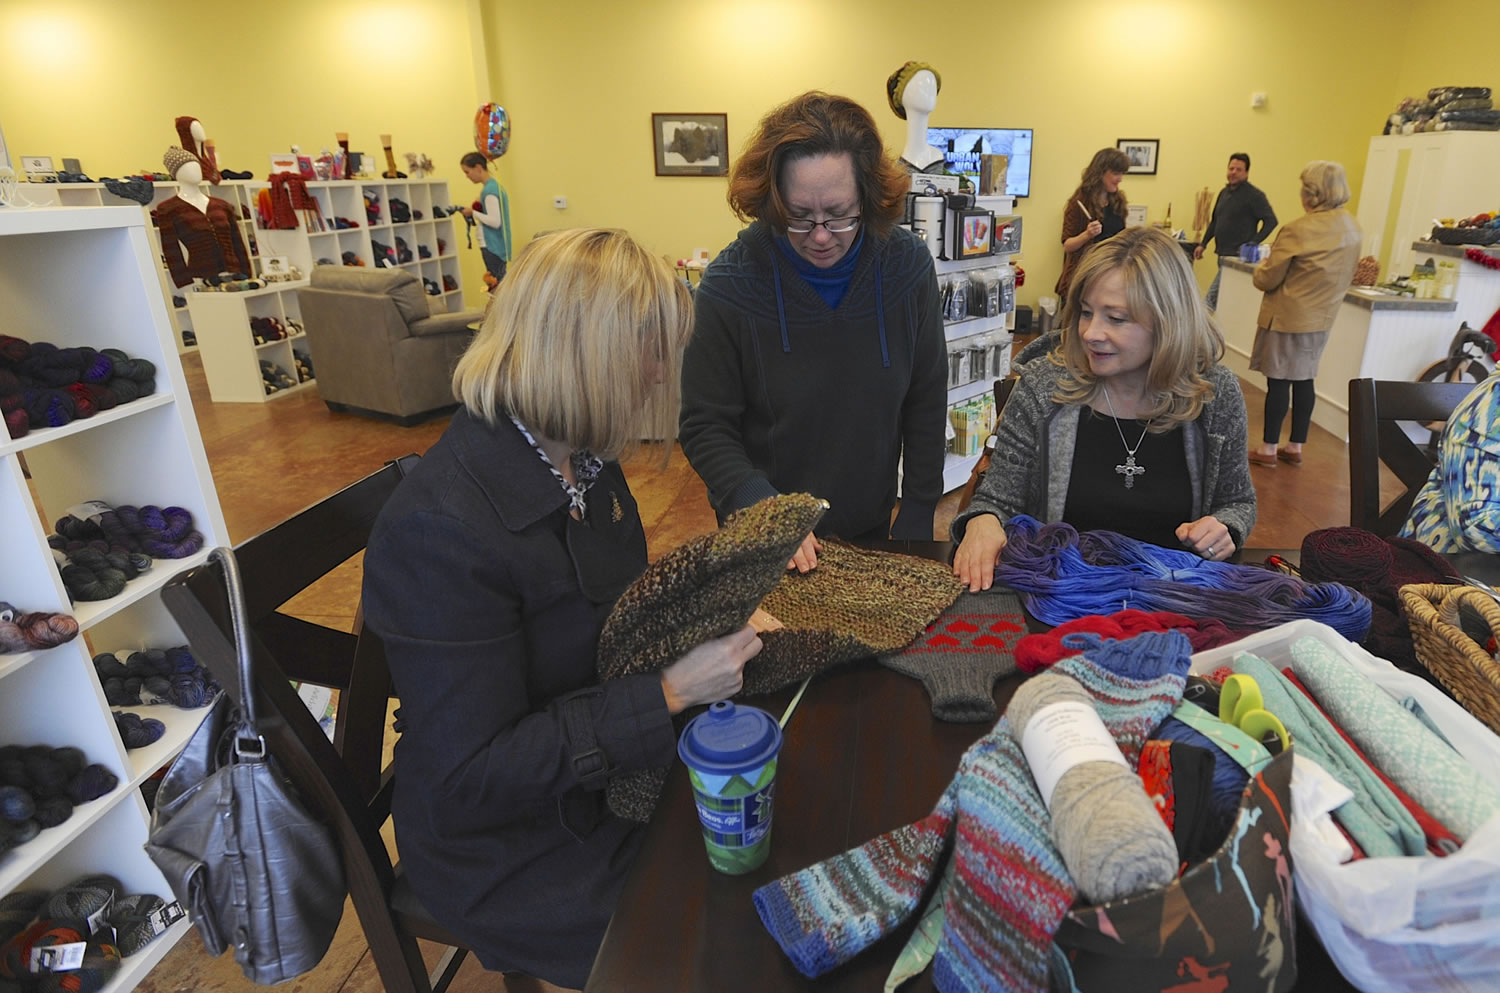 Rosalind Pirkl, from left, Loretta Barber and Laura Harper take part in a class at the Urban Wolves Fibre Arts store in Hazel Dell.